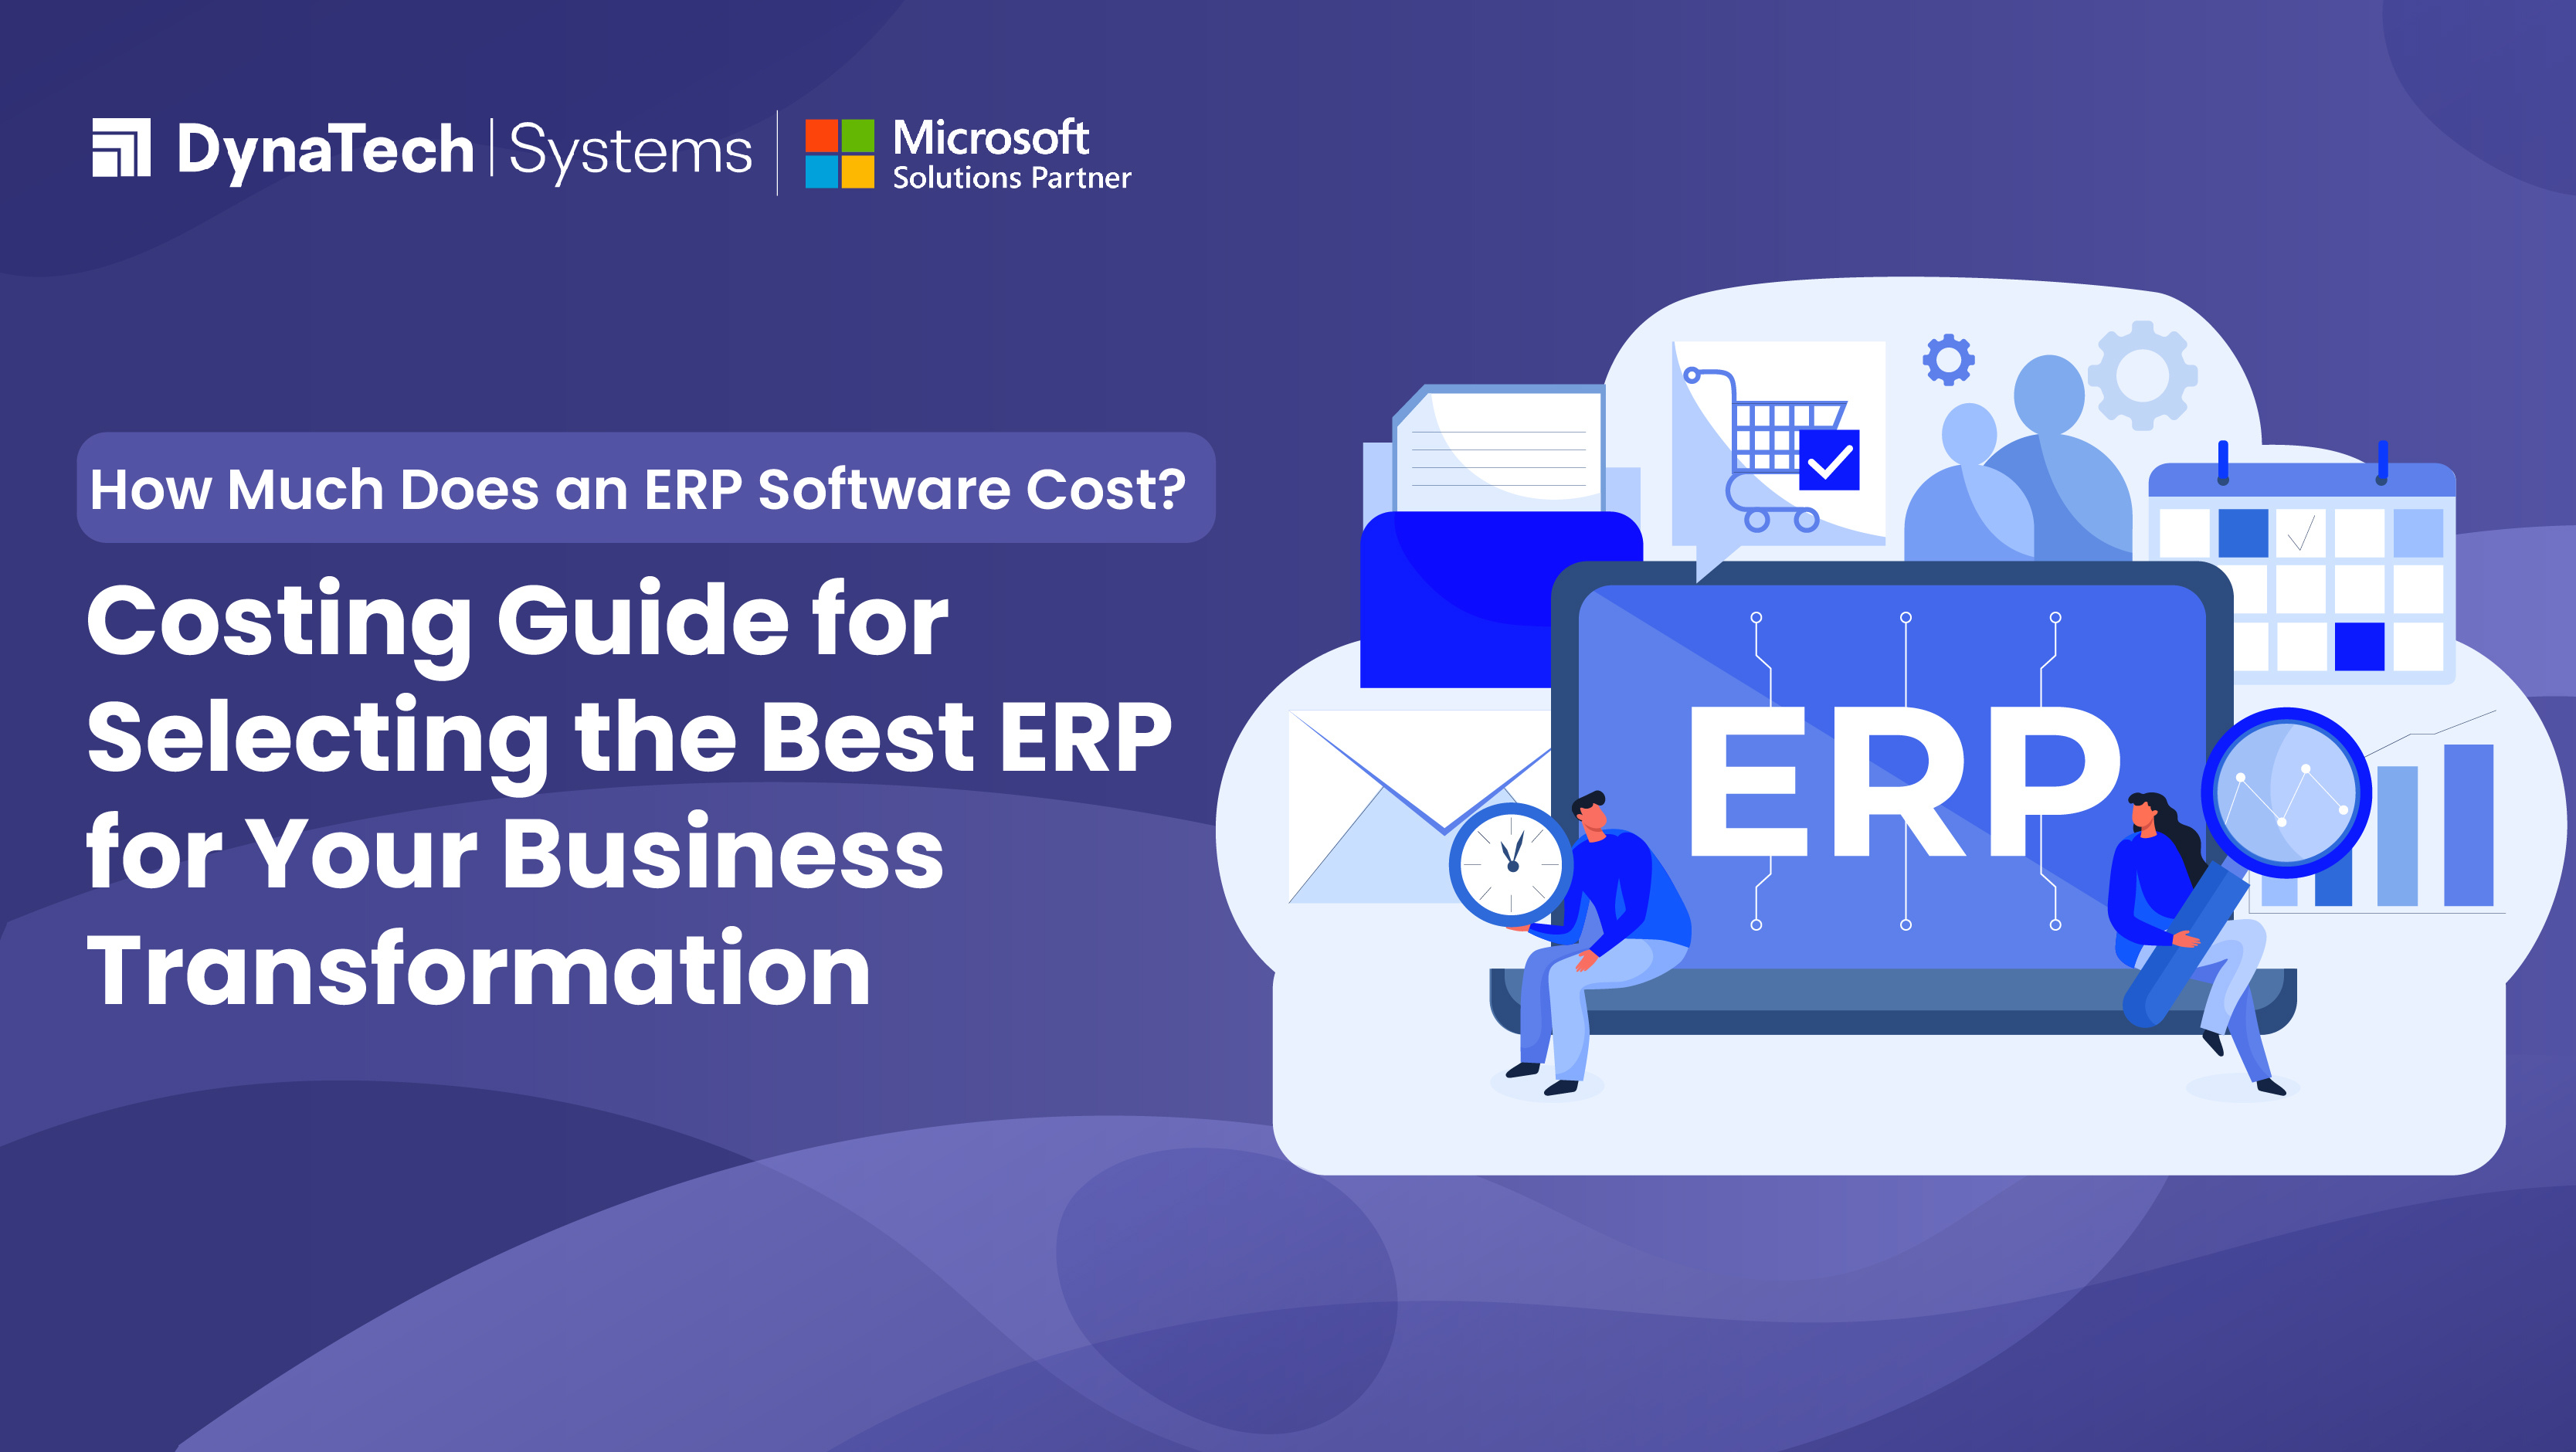 How Much Does an ERP Software Cost? Costing Guide for Selecting the Best ERP for Your Business Transformation